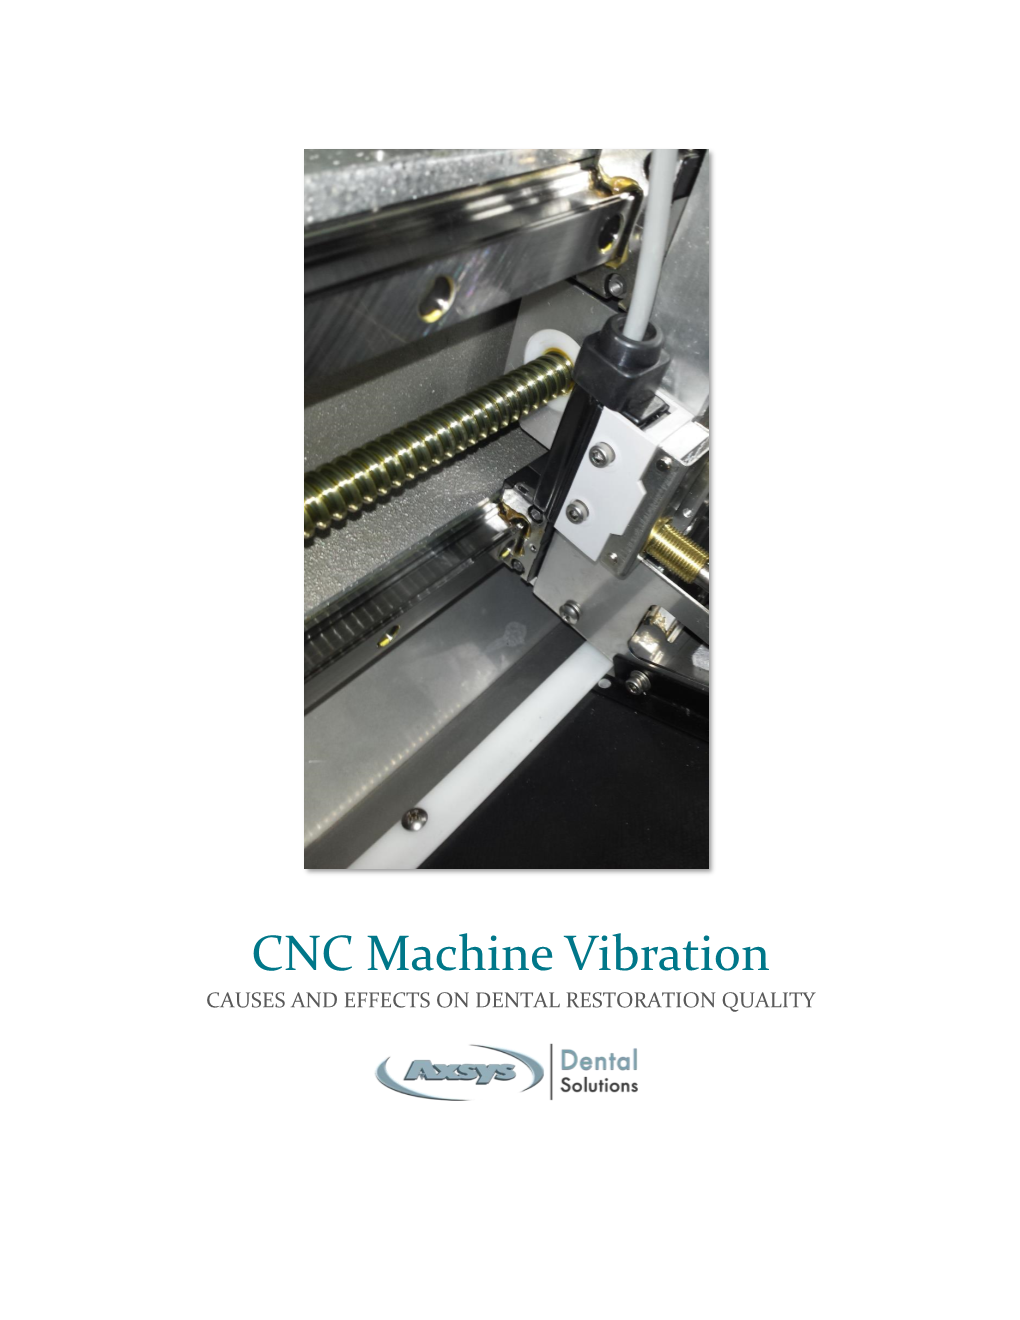 CNC Machine Vibration CAUSES and EFFECTS on DENTAL RESTORATION QUALITY